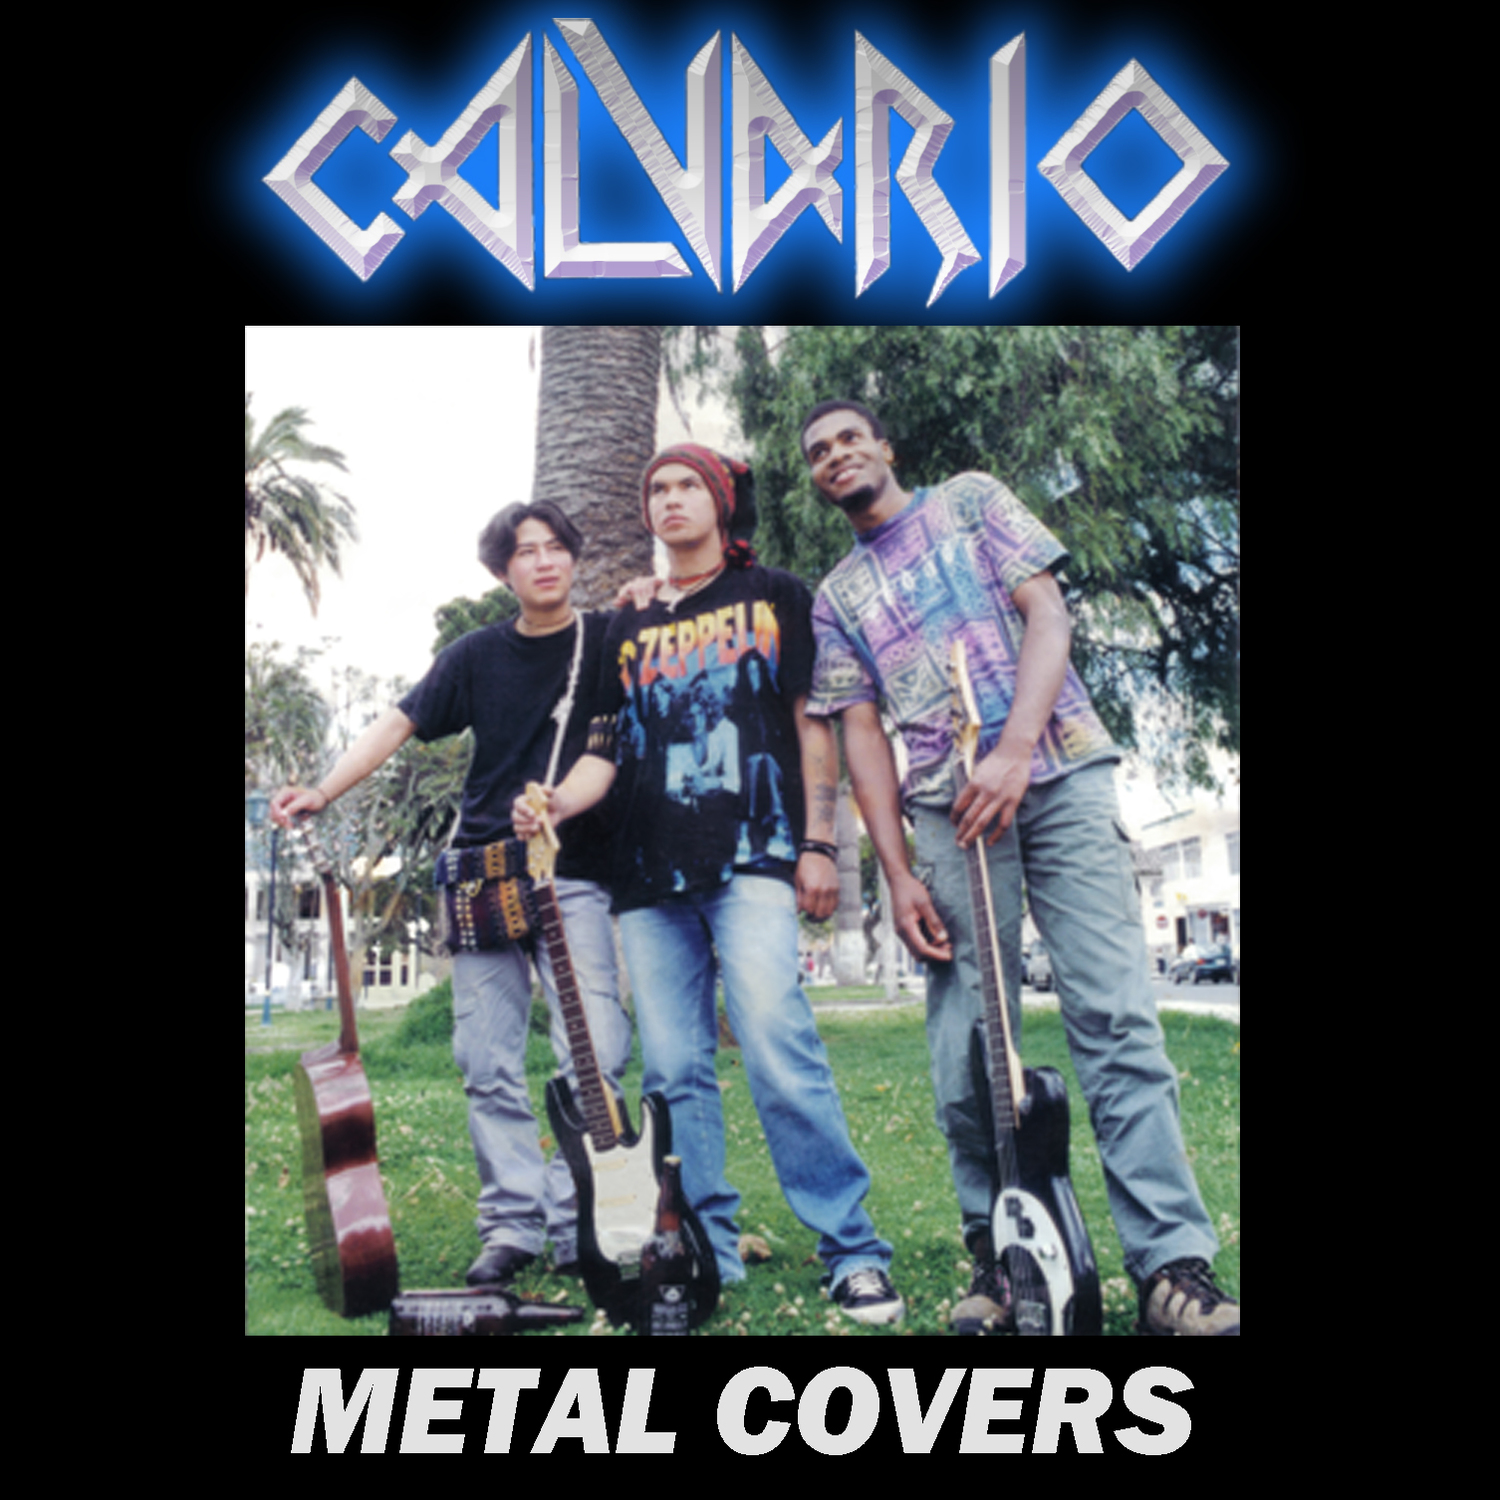 Los mejores covers